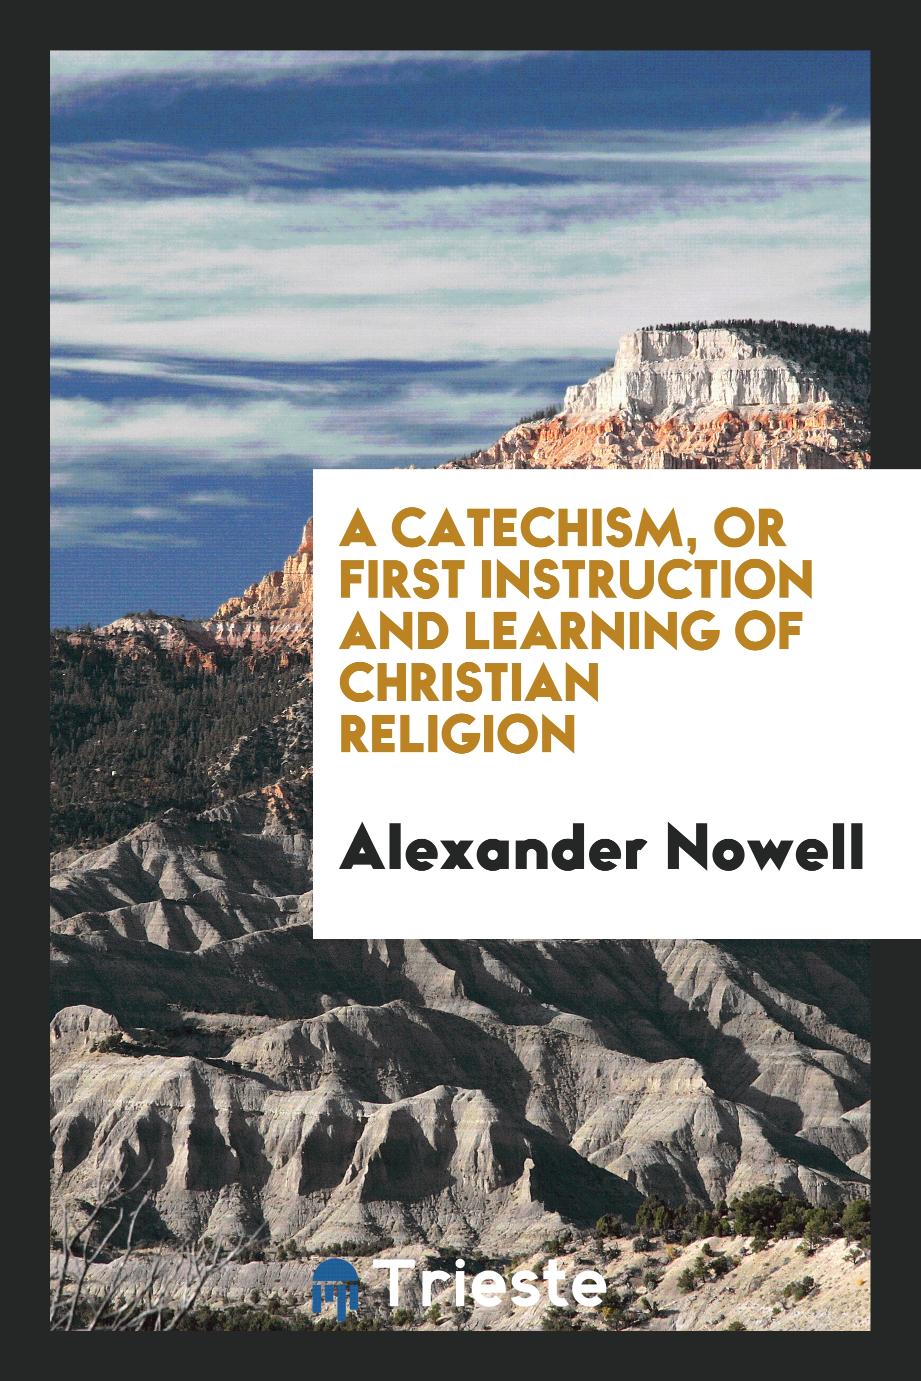 A Catechism, or First Instruction and Learning of Christian Religion